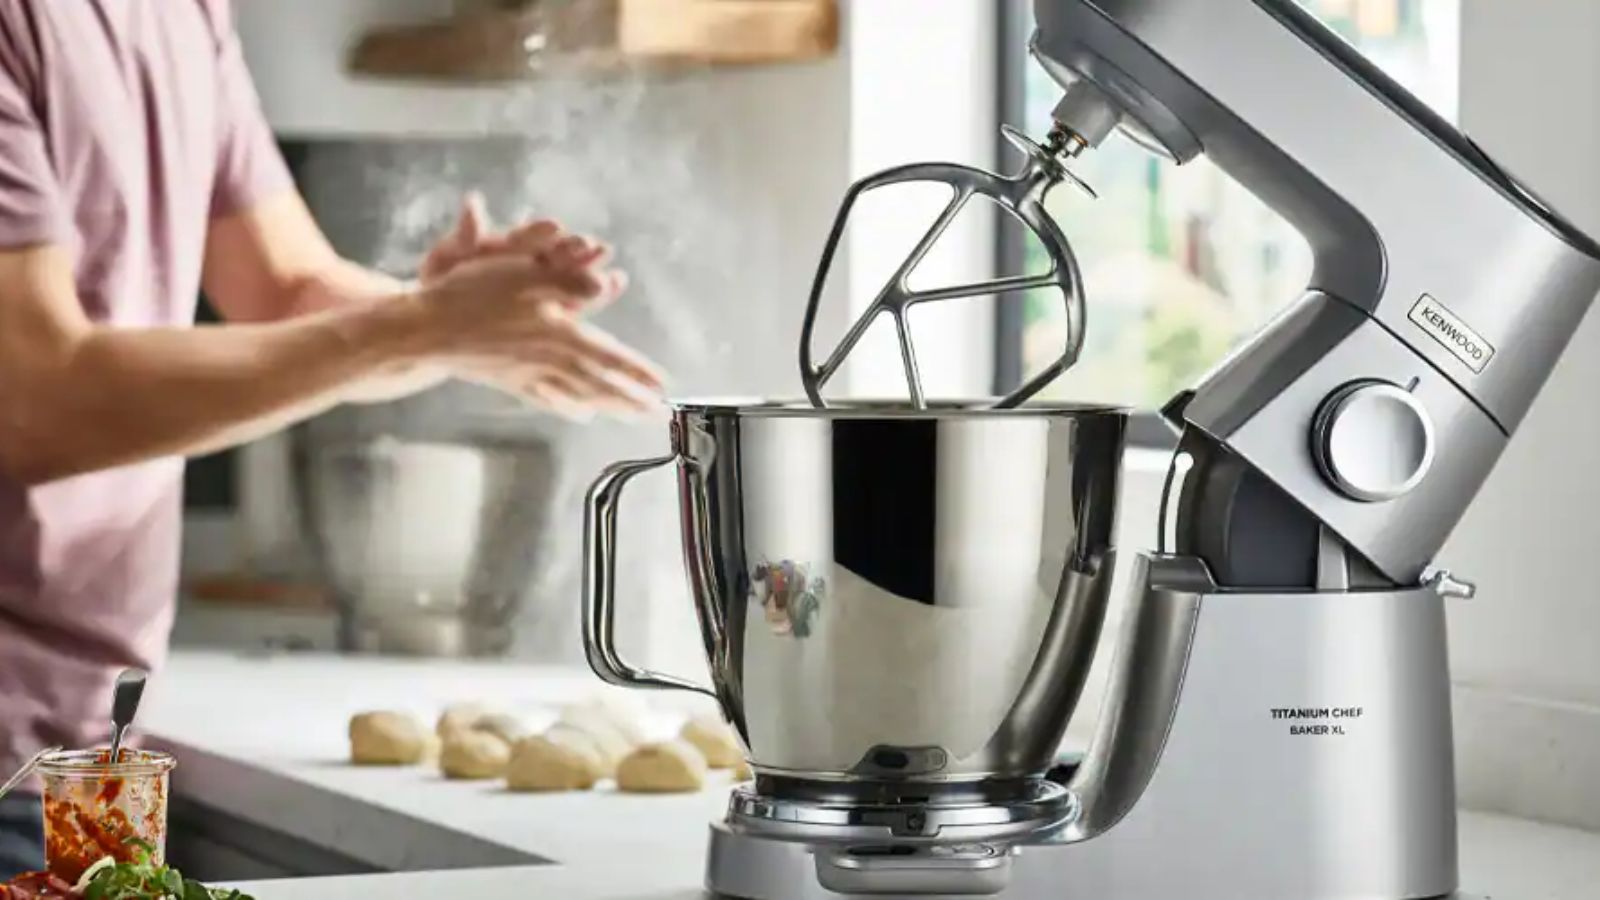 Kenwood Chef XL Titanium Stand Mixer Review: every best friend | Homes & Gardens